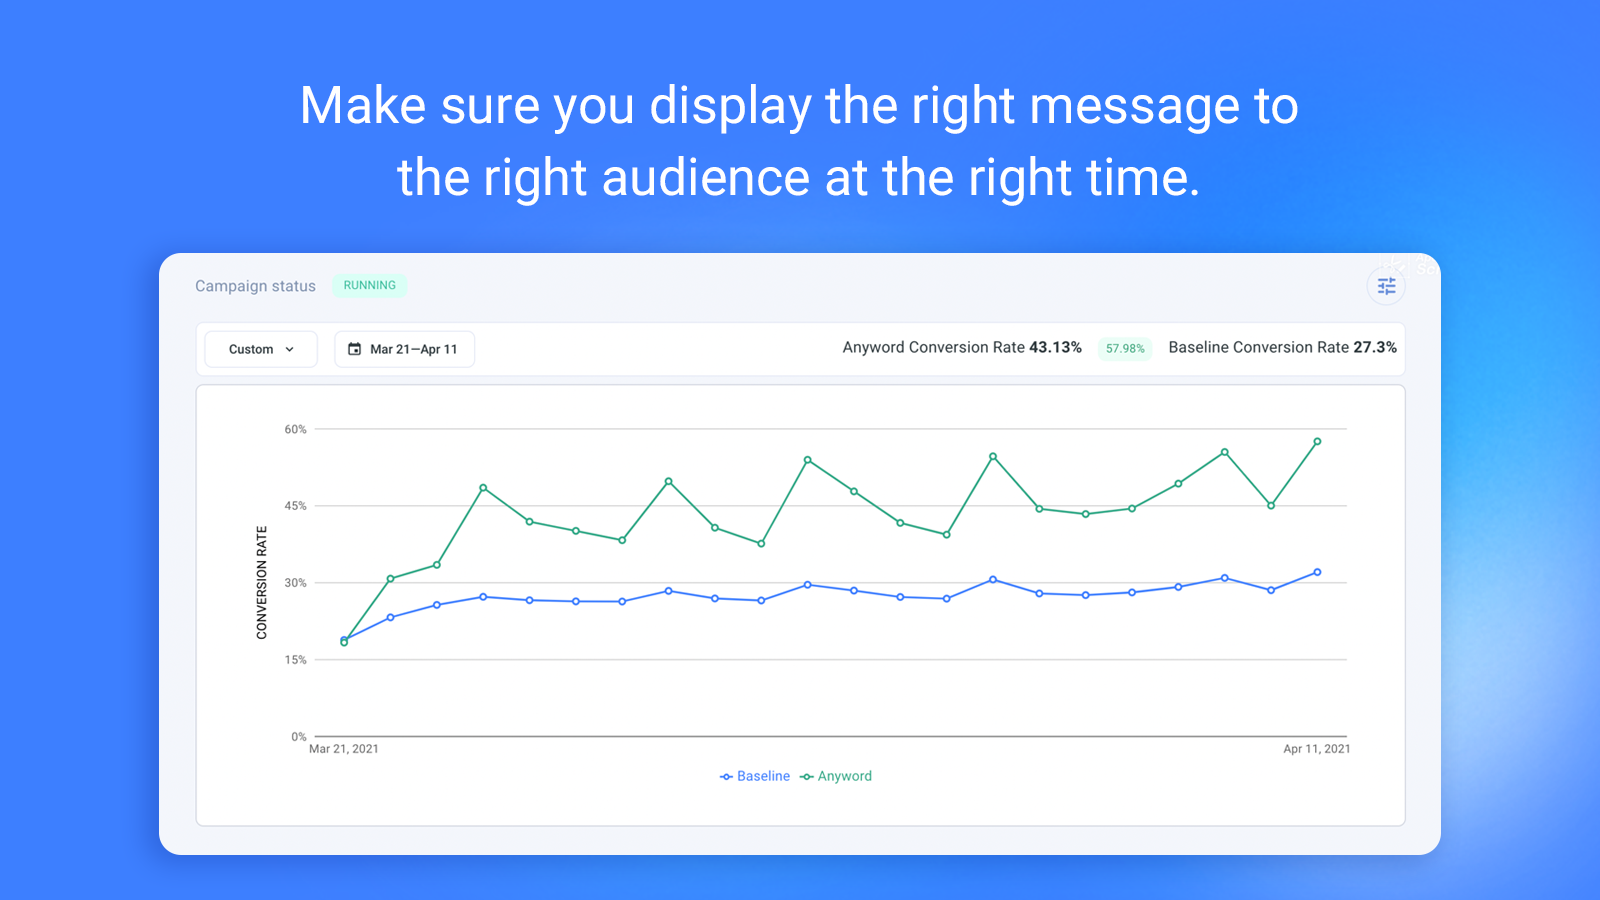 Make sure you display the right message to the right audience at the right time.